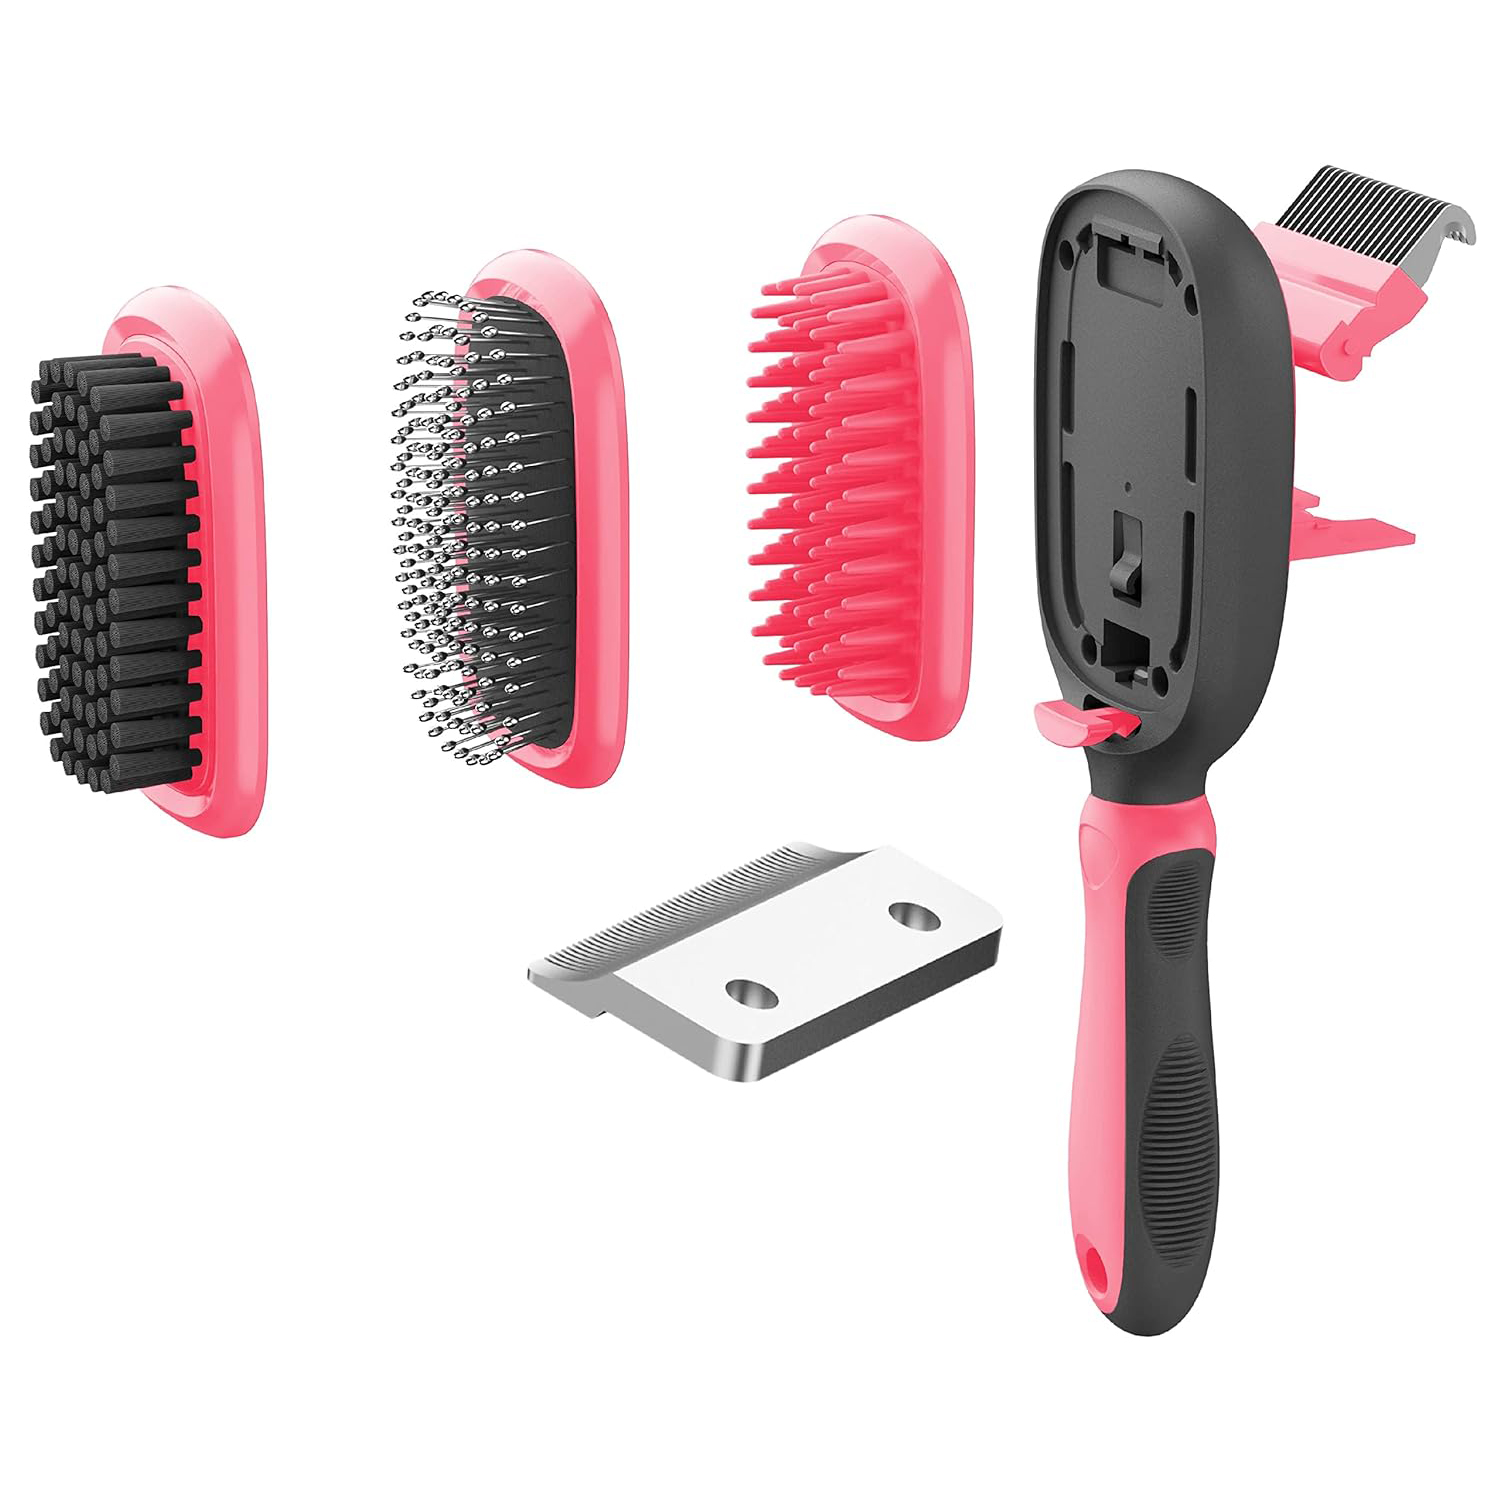 Pet Life ® 'Conversion' 5-in-1 Interchangeable Dematting and Deshedding Bristle Pin and Massage Grooming Pet Comb